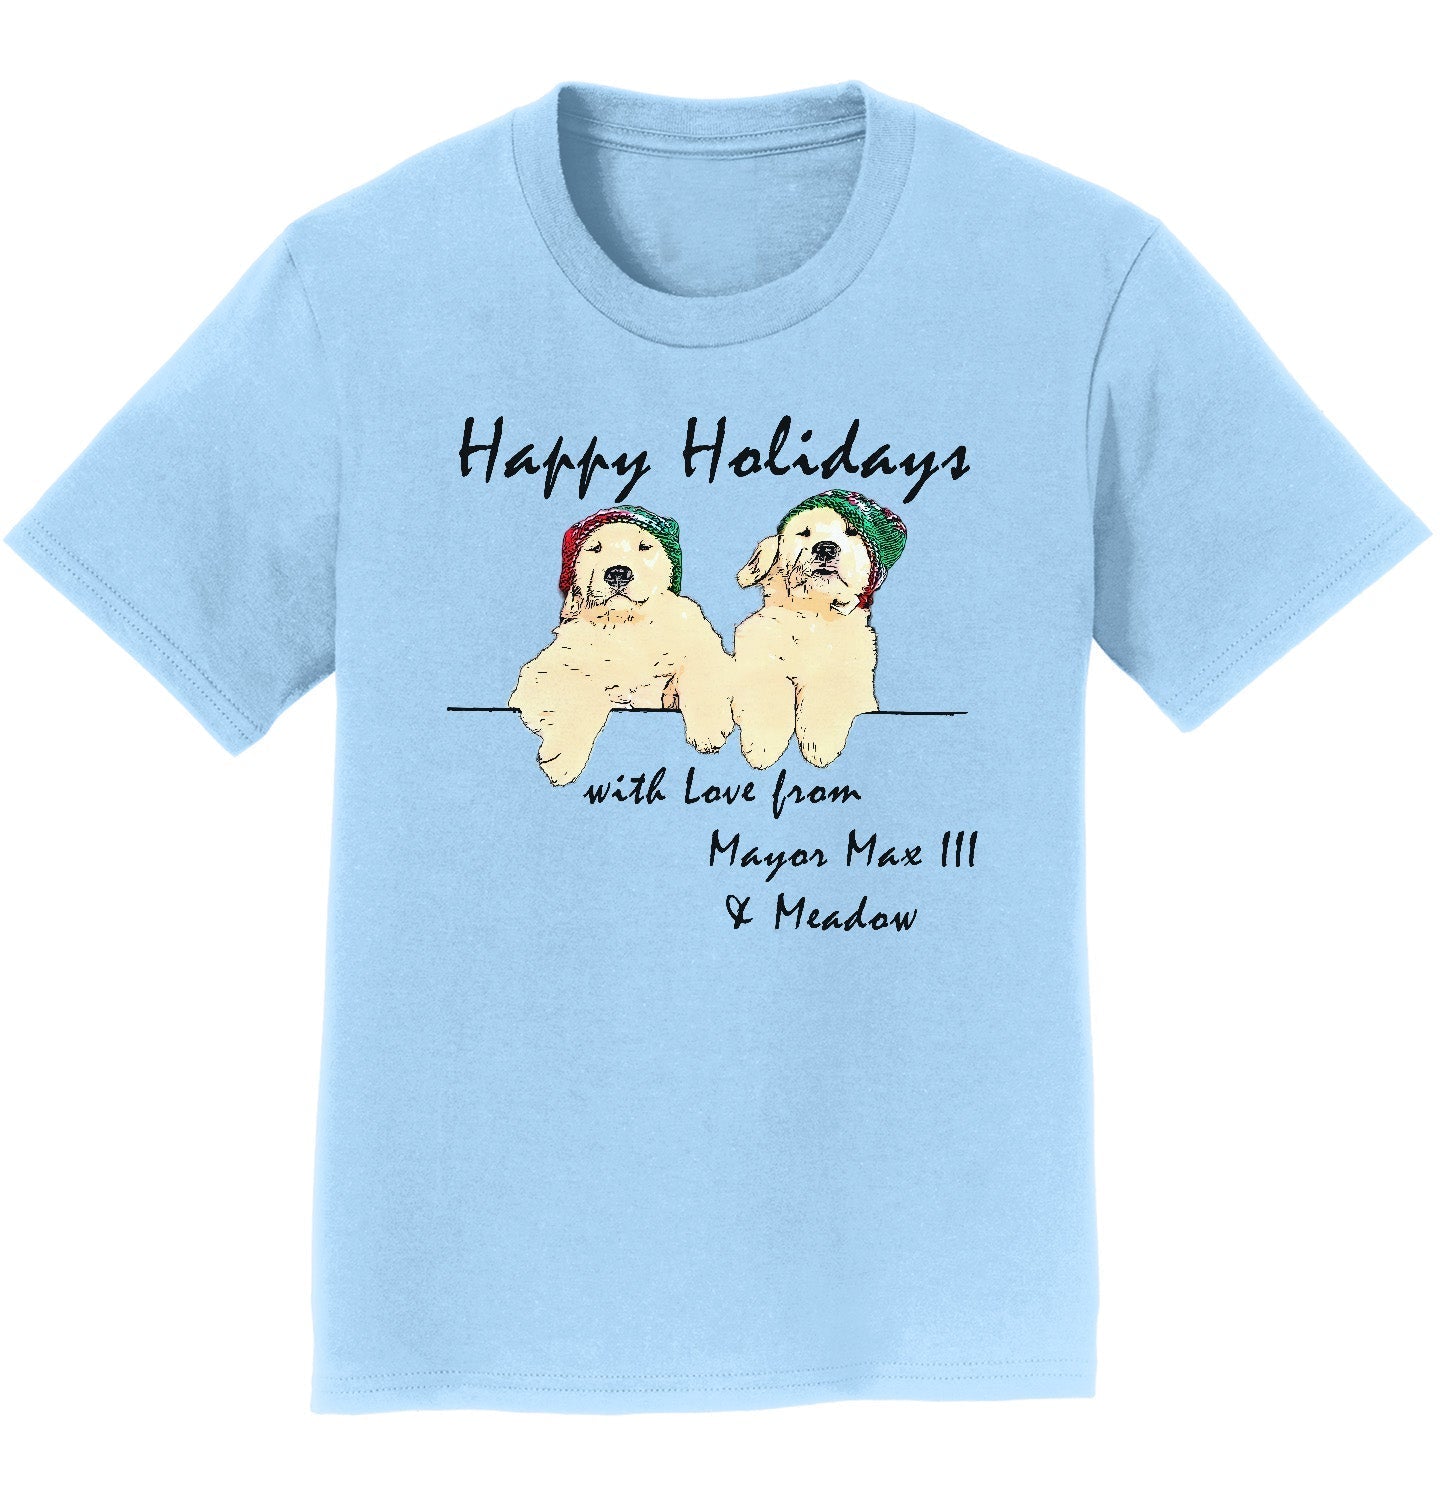 Happy Holidays from Mayor Max III and Meadow - Kids' Unisex T-Shirt